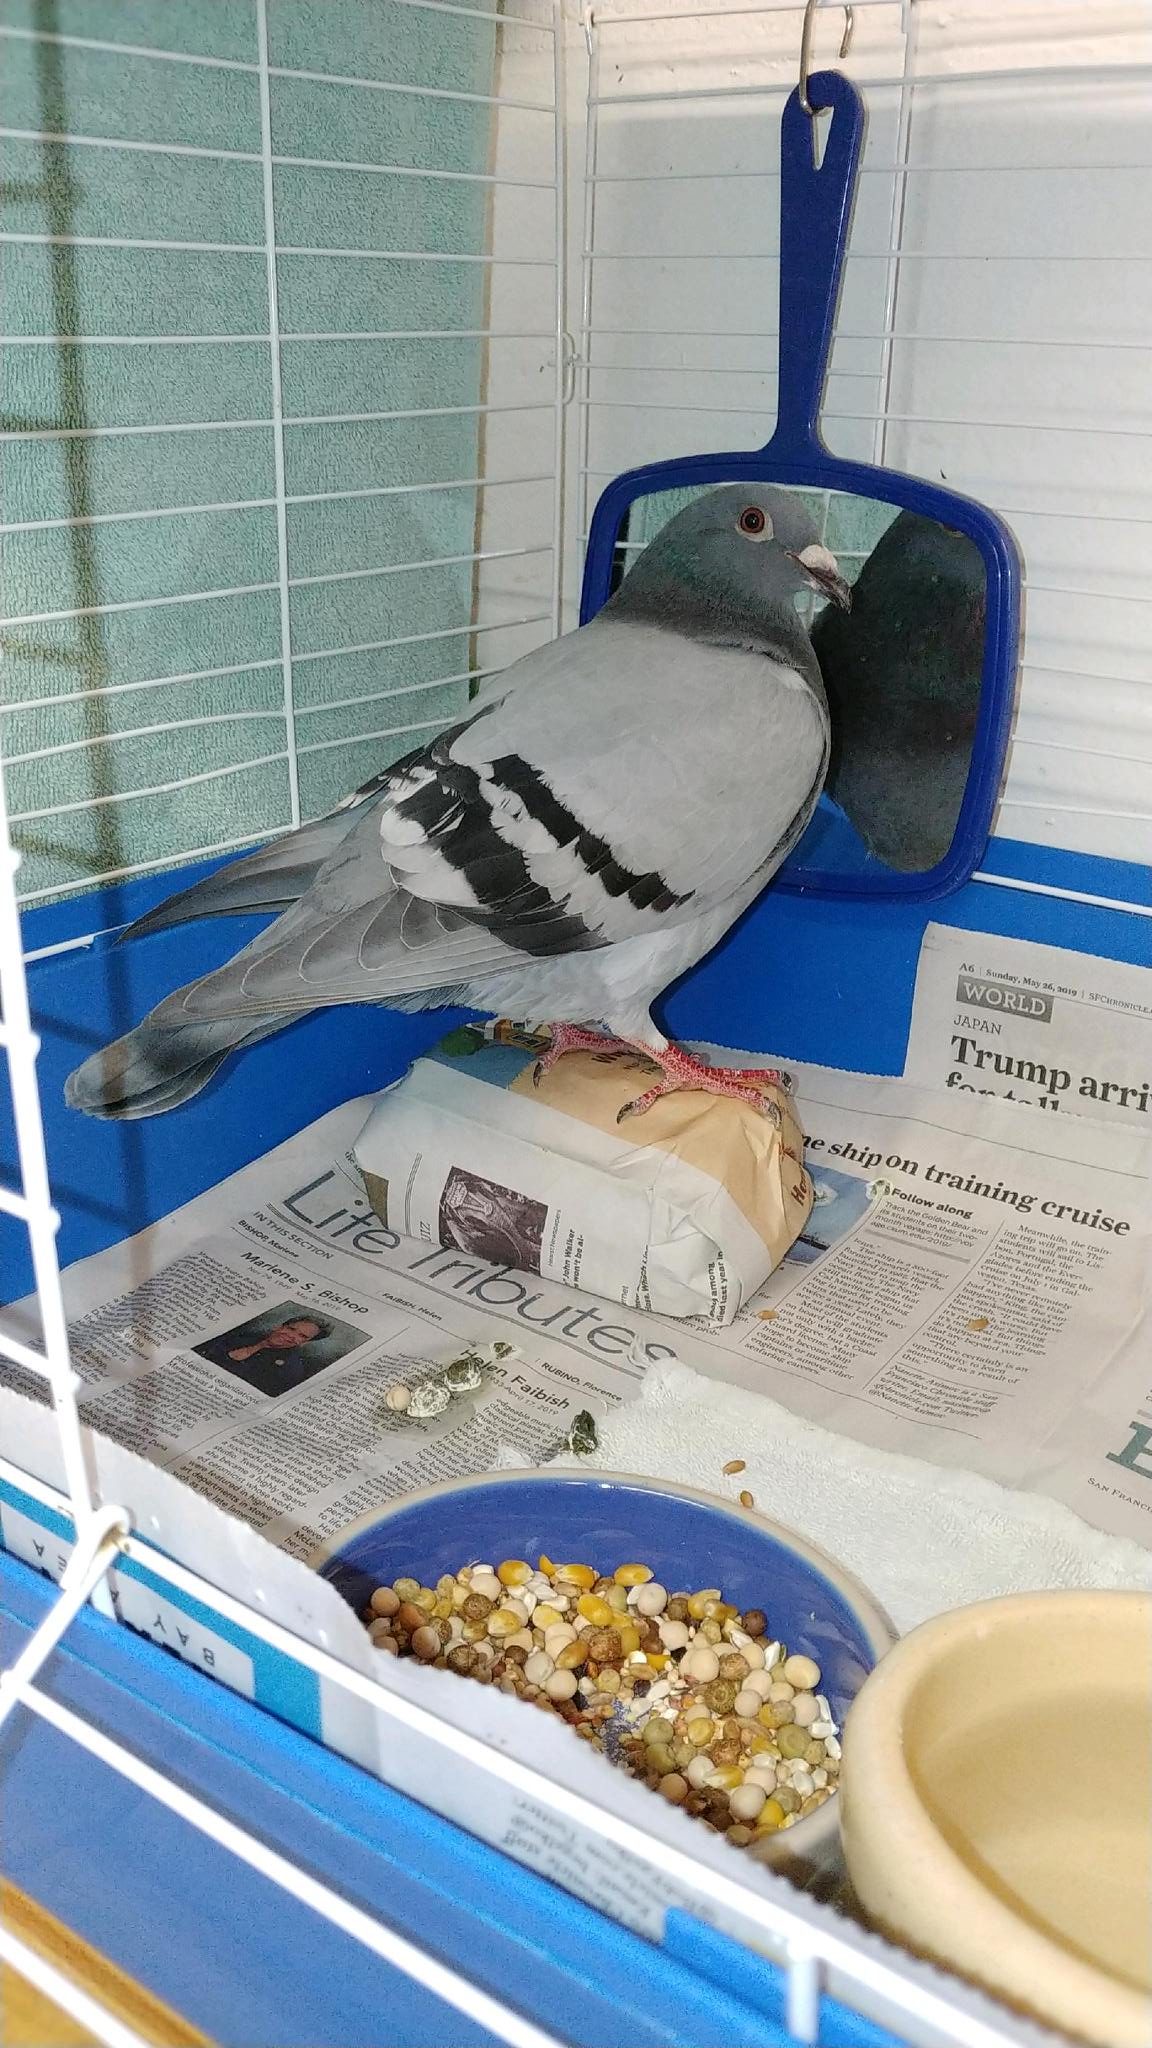 Rescued blue bar racing pigeon keeping company with a mirror in her shelter cage